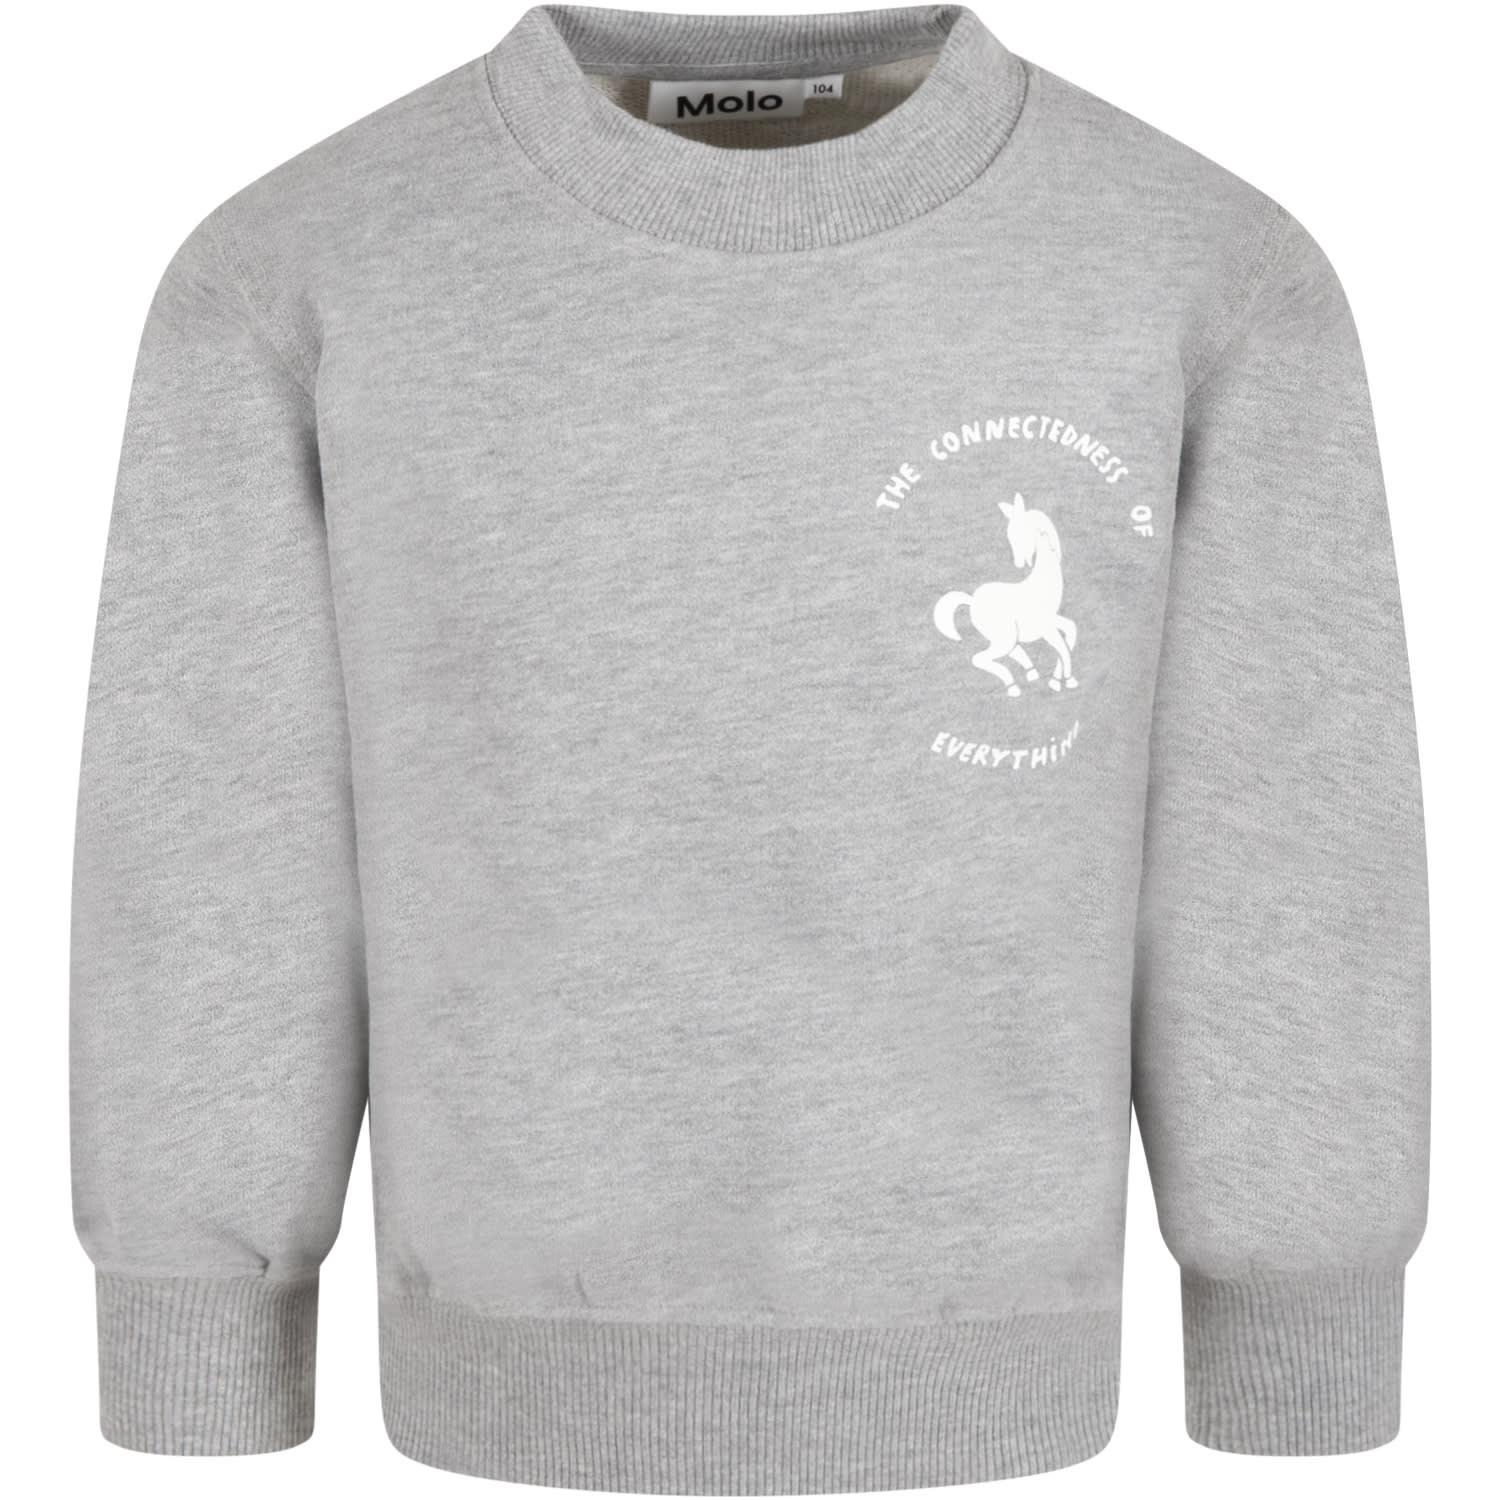 Molo Grey Sweatshirt For Kids With Horse